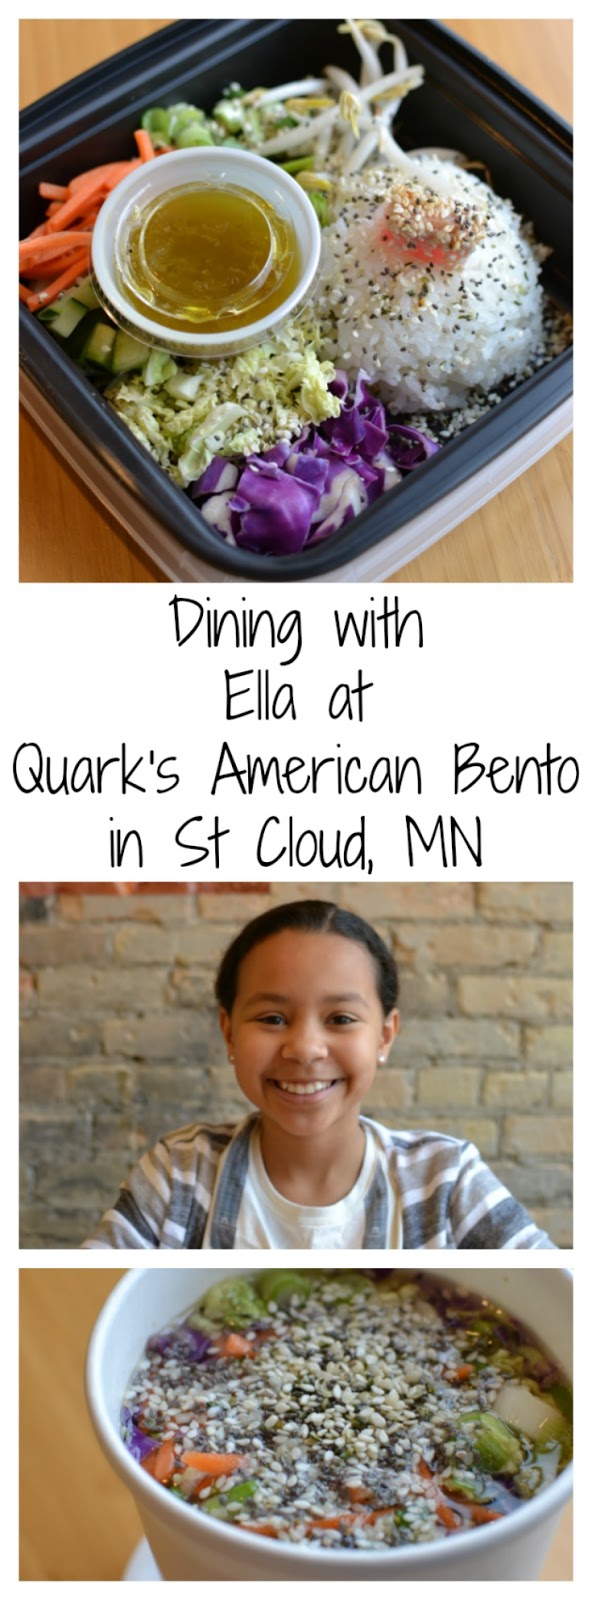 Dining with Ella at Quark's American Bento in St Cloud, Minnesota! Great meals for kids and adults, fresh, healthy, gluten free, affordable and delicious!